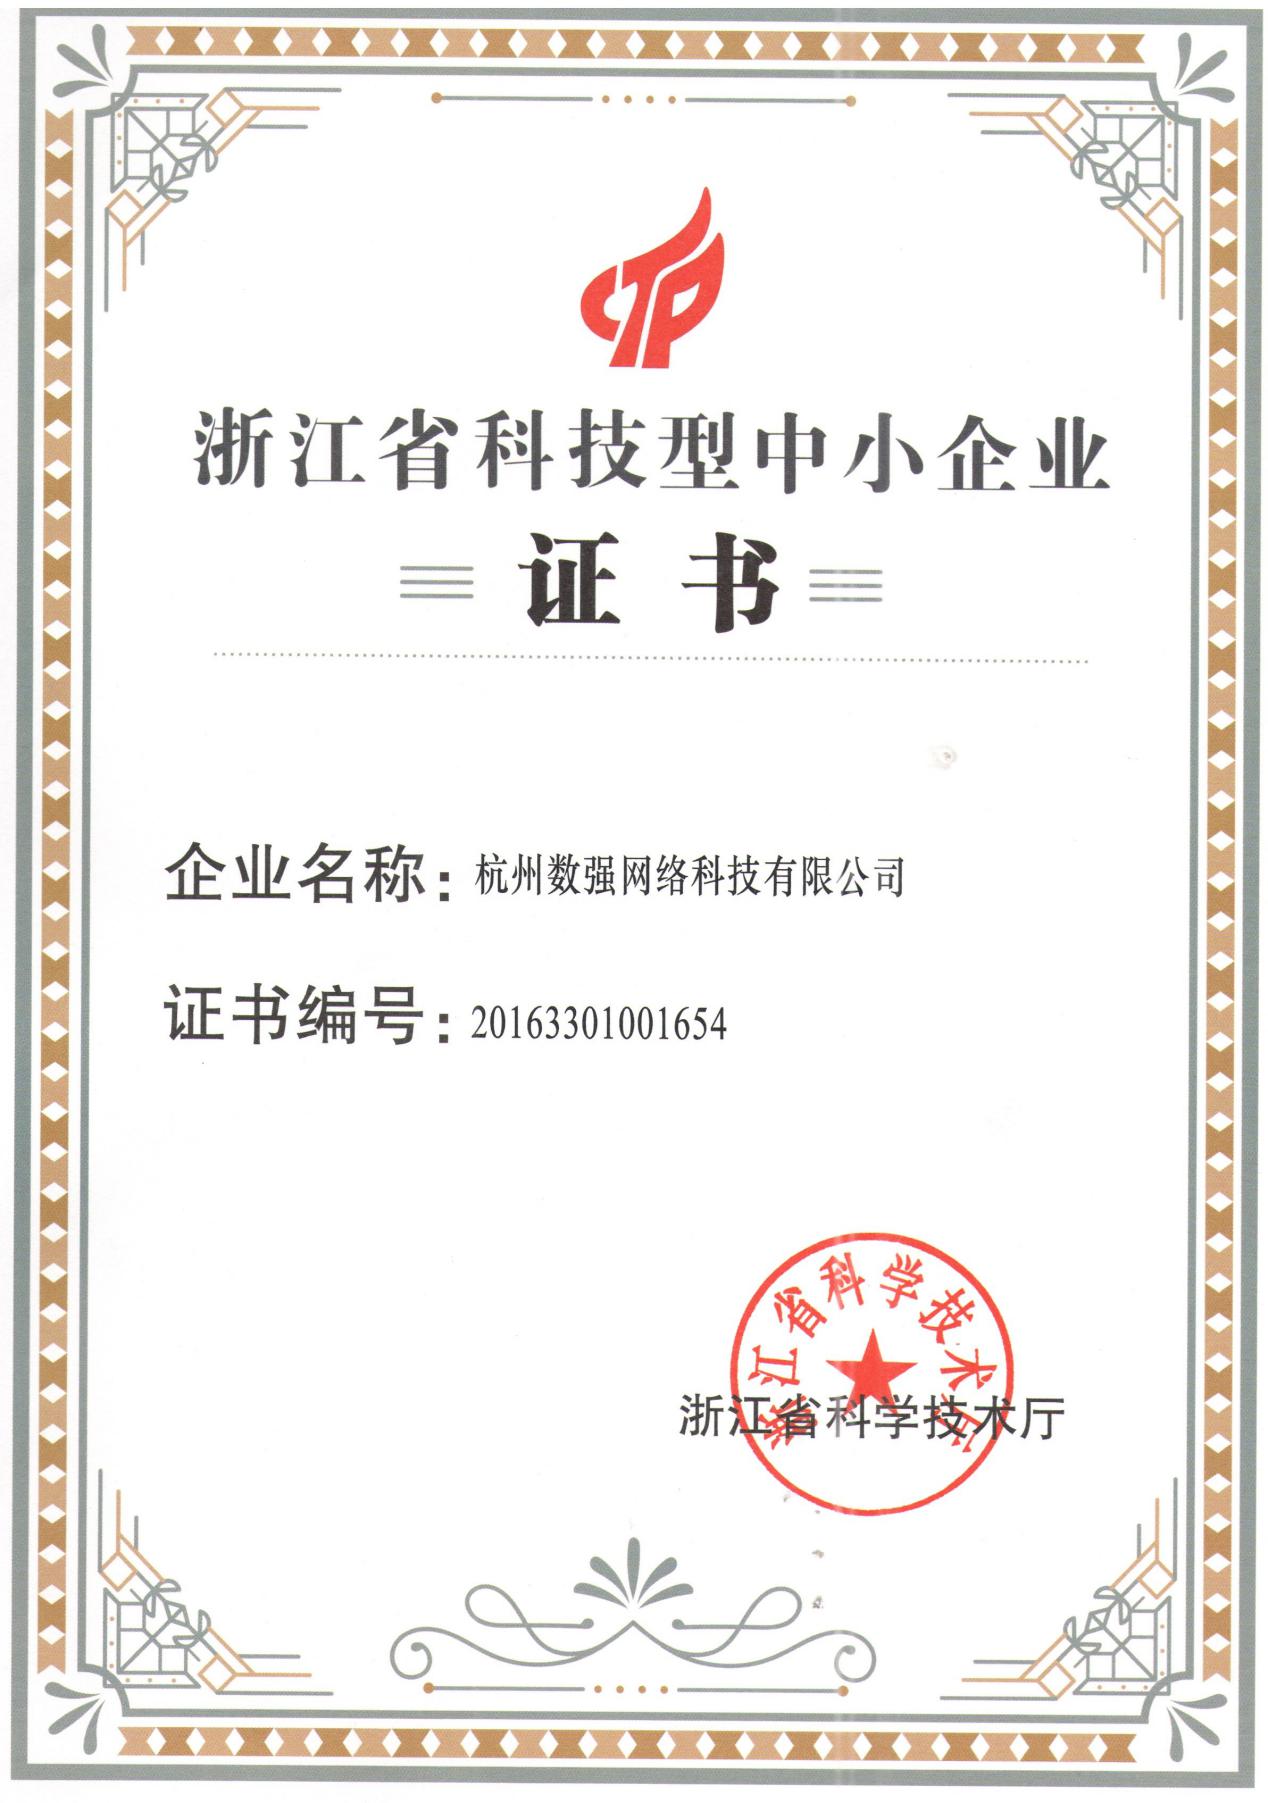 Hangzhou Strong Data Network Technology Co., Ltd is awarded the honourable title of small and medium-sized technology-based enterprise in Zhejiang Province.